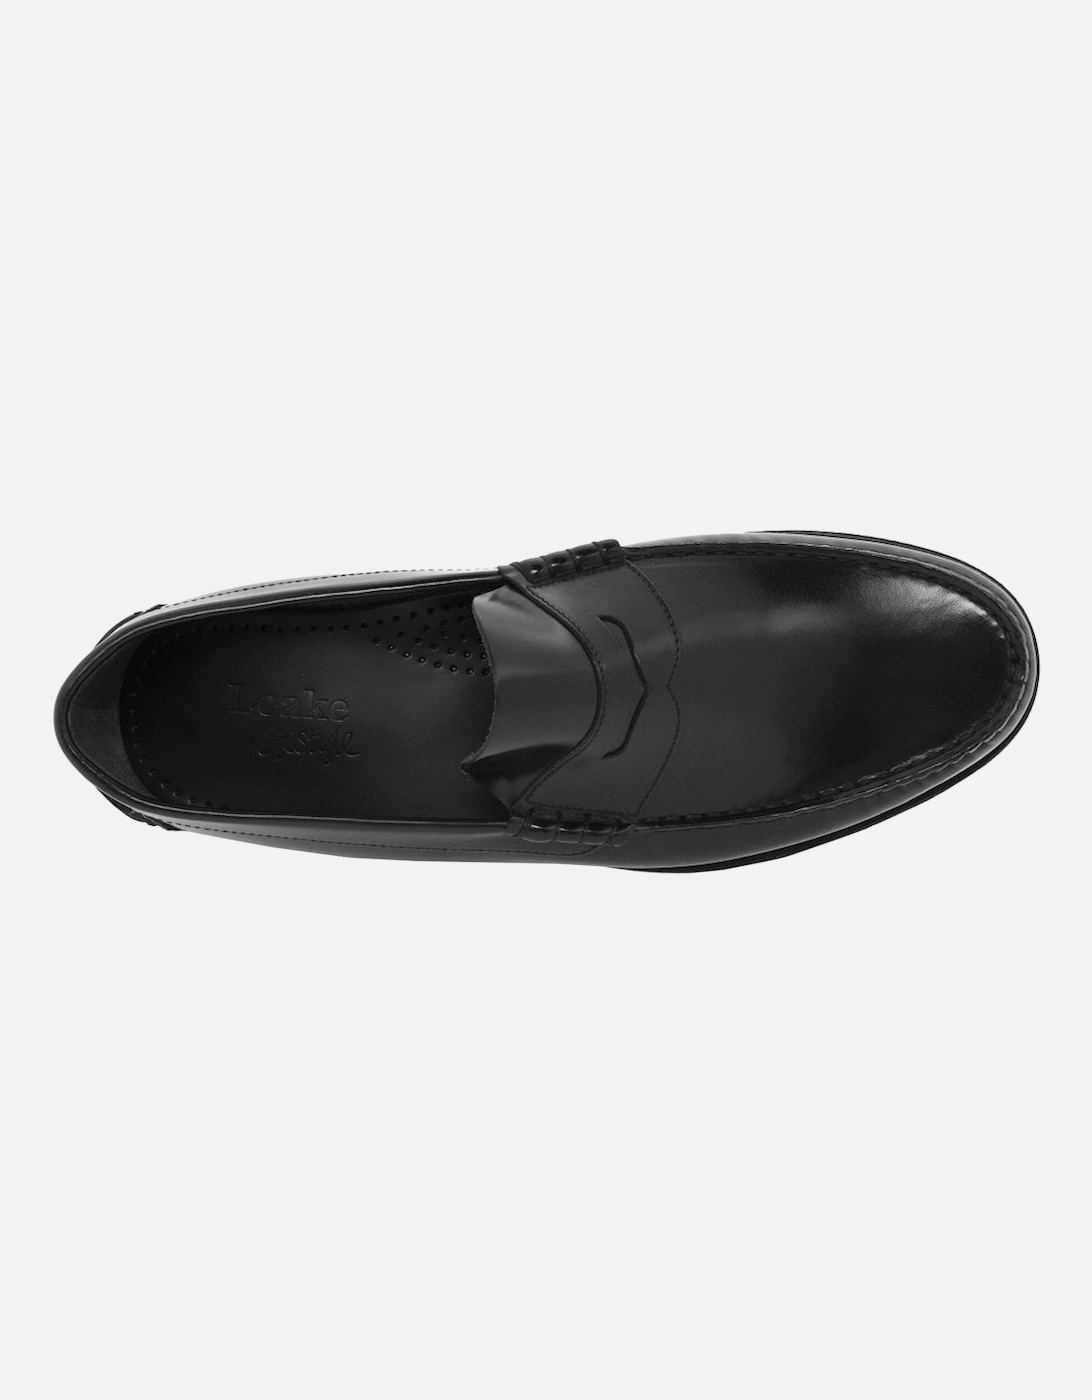 Princeton Leather Moccasin Shoes